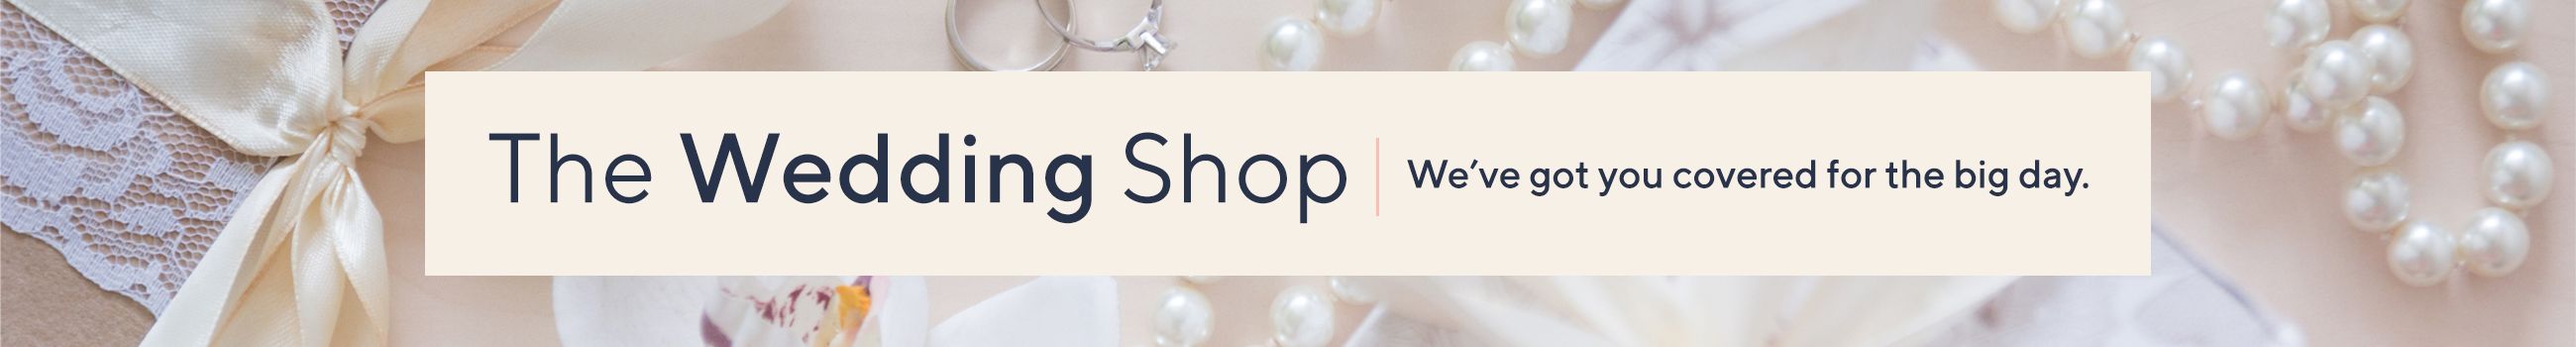 The Wedding Shop: We've got you covered for the big day.